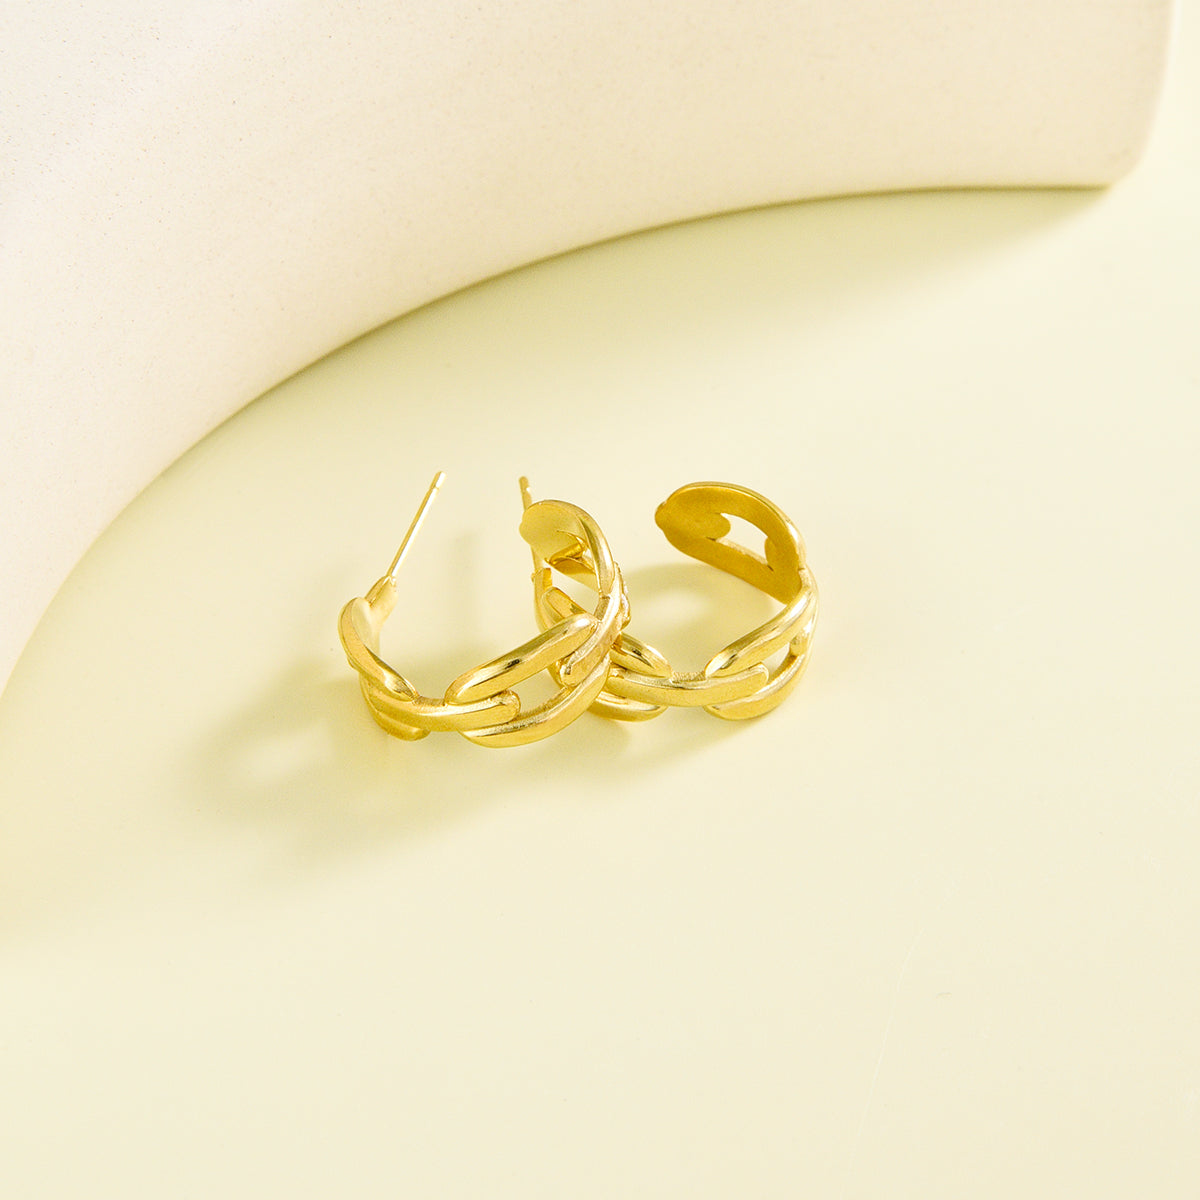 Small sized golden earrings with spacious chain design